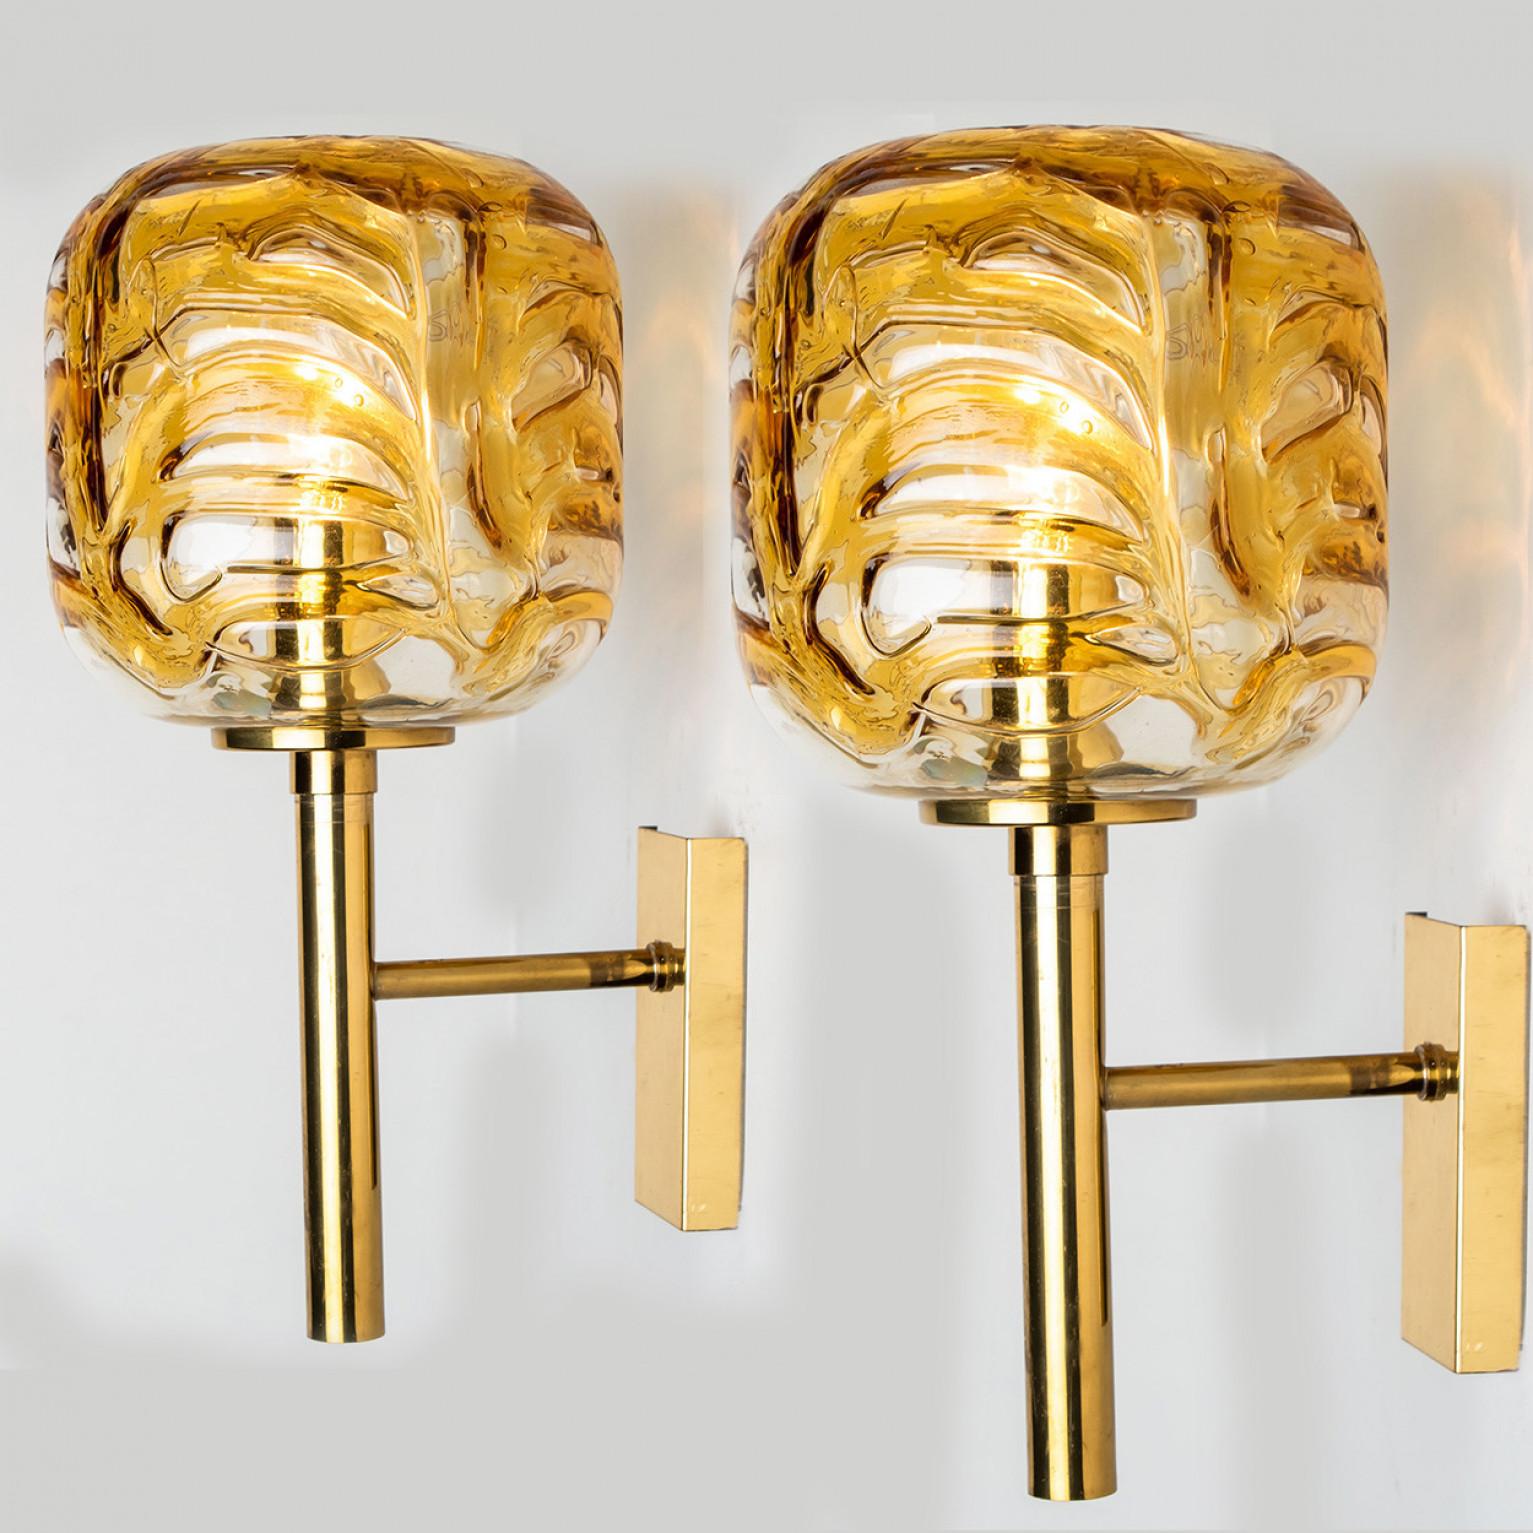 Mid-20th Century Pair of Murano Yellow Glass and Brass Wall Lights by Doria Leuchten, 1960s For Sale